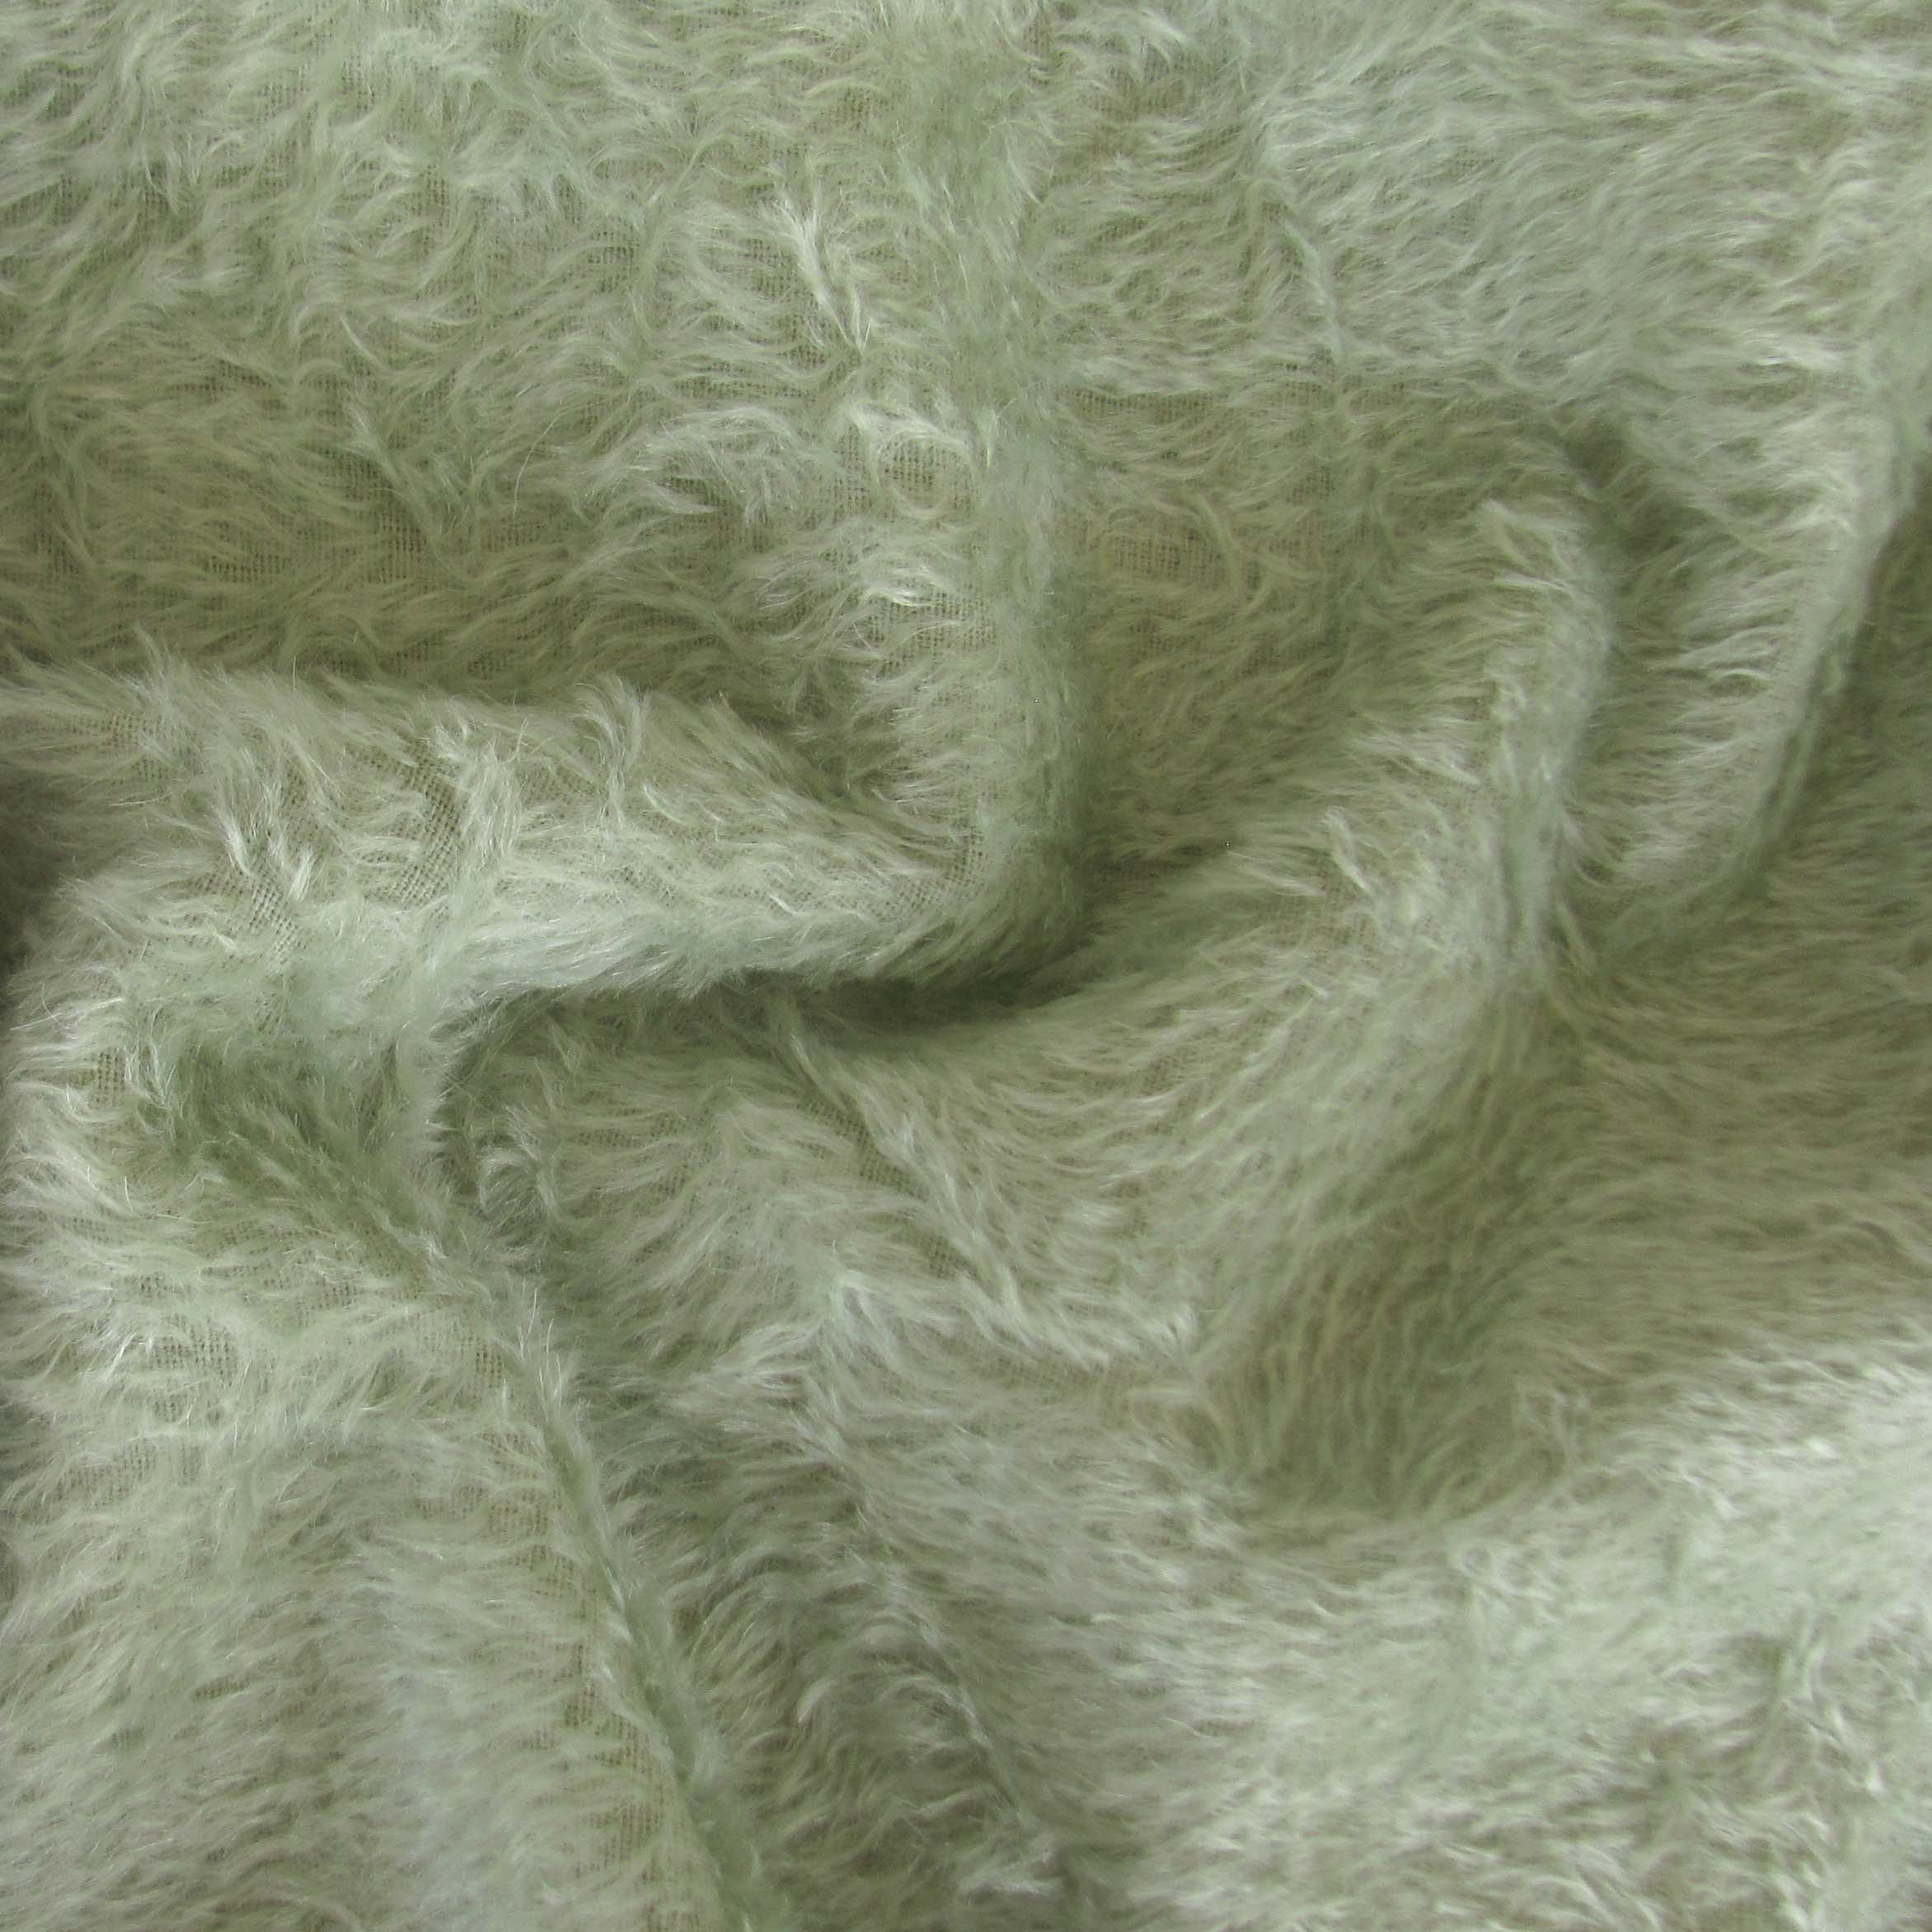 1/4 yd 300S/C Mint INTERCAL 1/2" Ultra-Sparse Curly S-Finish Mohair Fur Fabric 